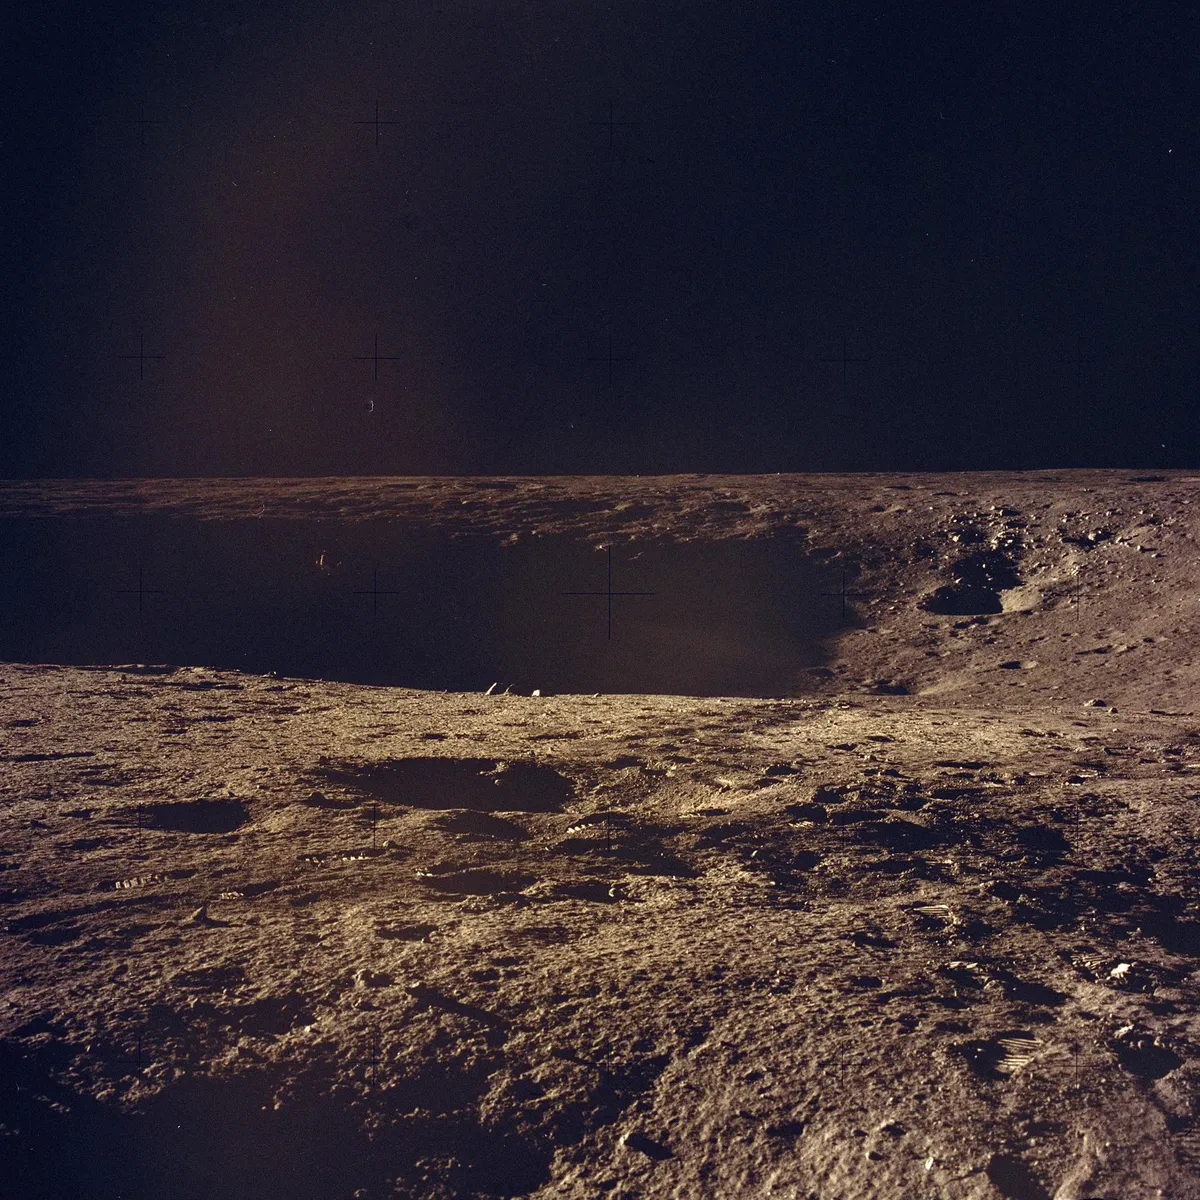 Lunar surface exploration,14 - 24 November. Apollo 12 was designed to carry out a number of lunar soil activities including the collection of 34kg of rock samples. This image was taken during the mission, showing the lunar surface and the footprints of the astronauts in the dust.Credit: NASA